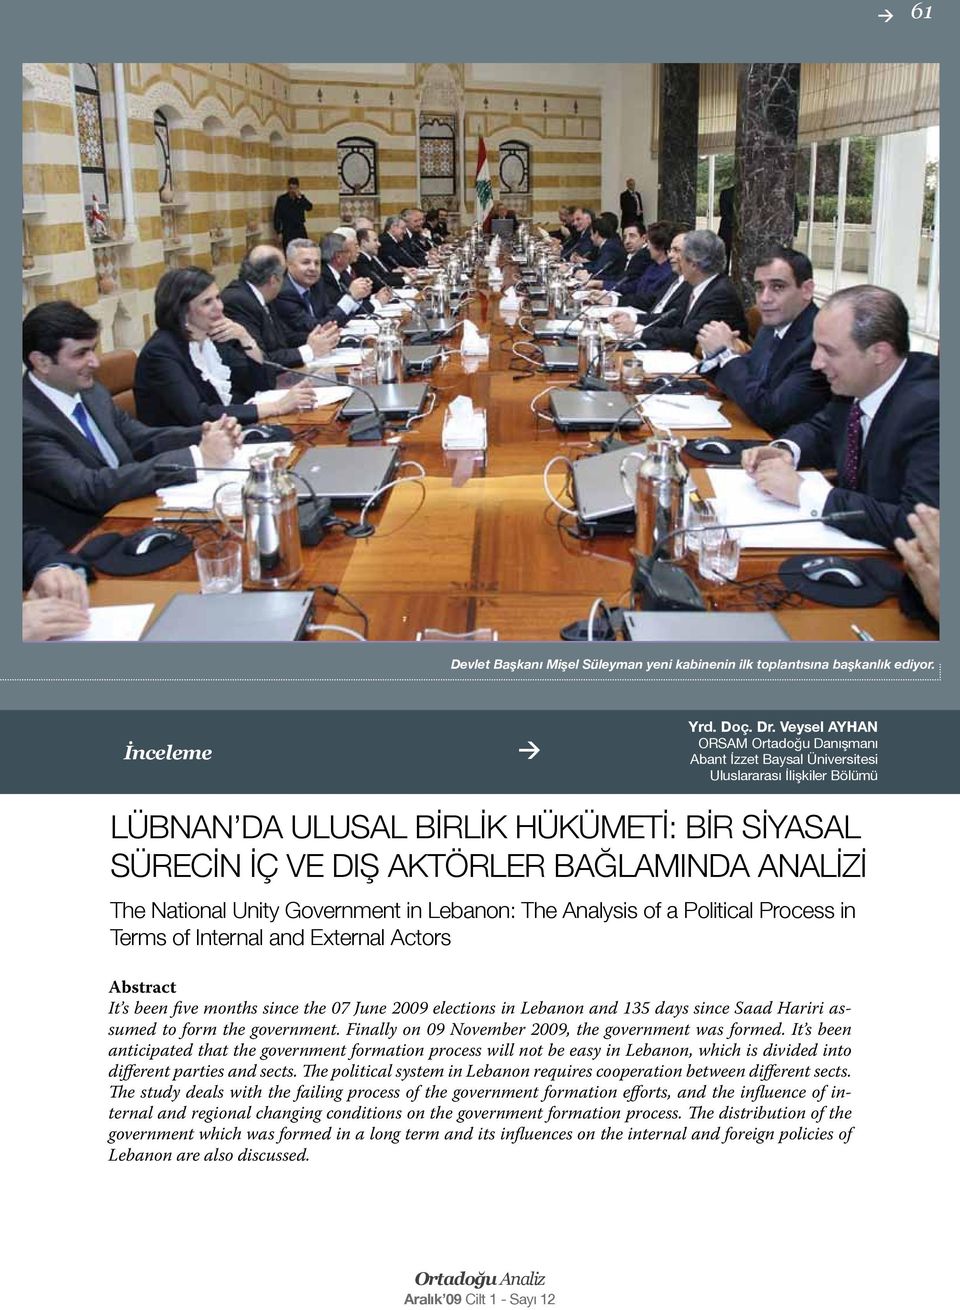 National Unity Government in Lebanon: The Analysis of a Political Process in Terms of Internal and External Actors Abstract It s been five months since the 07 June 2009 elections in Lebanon and 135